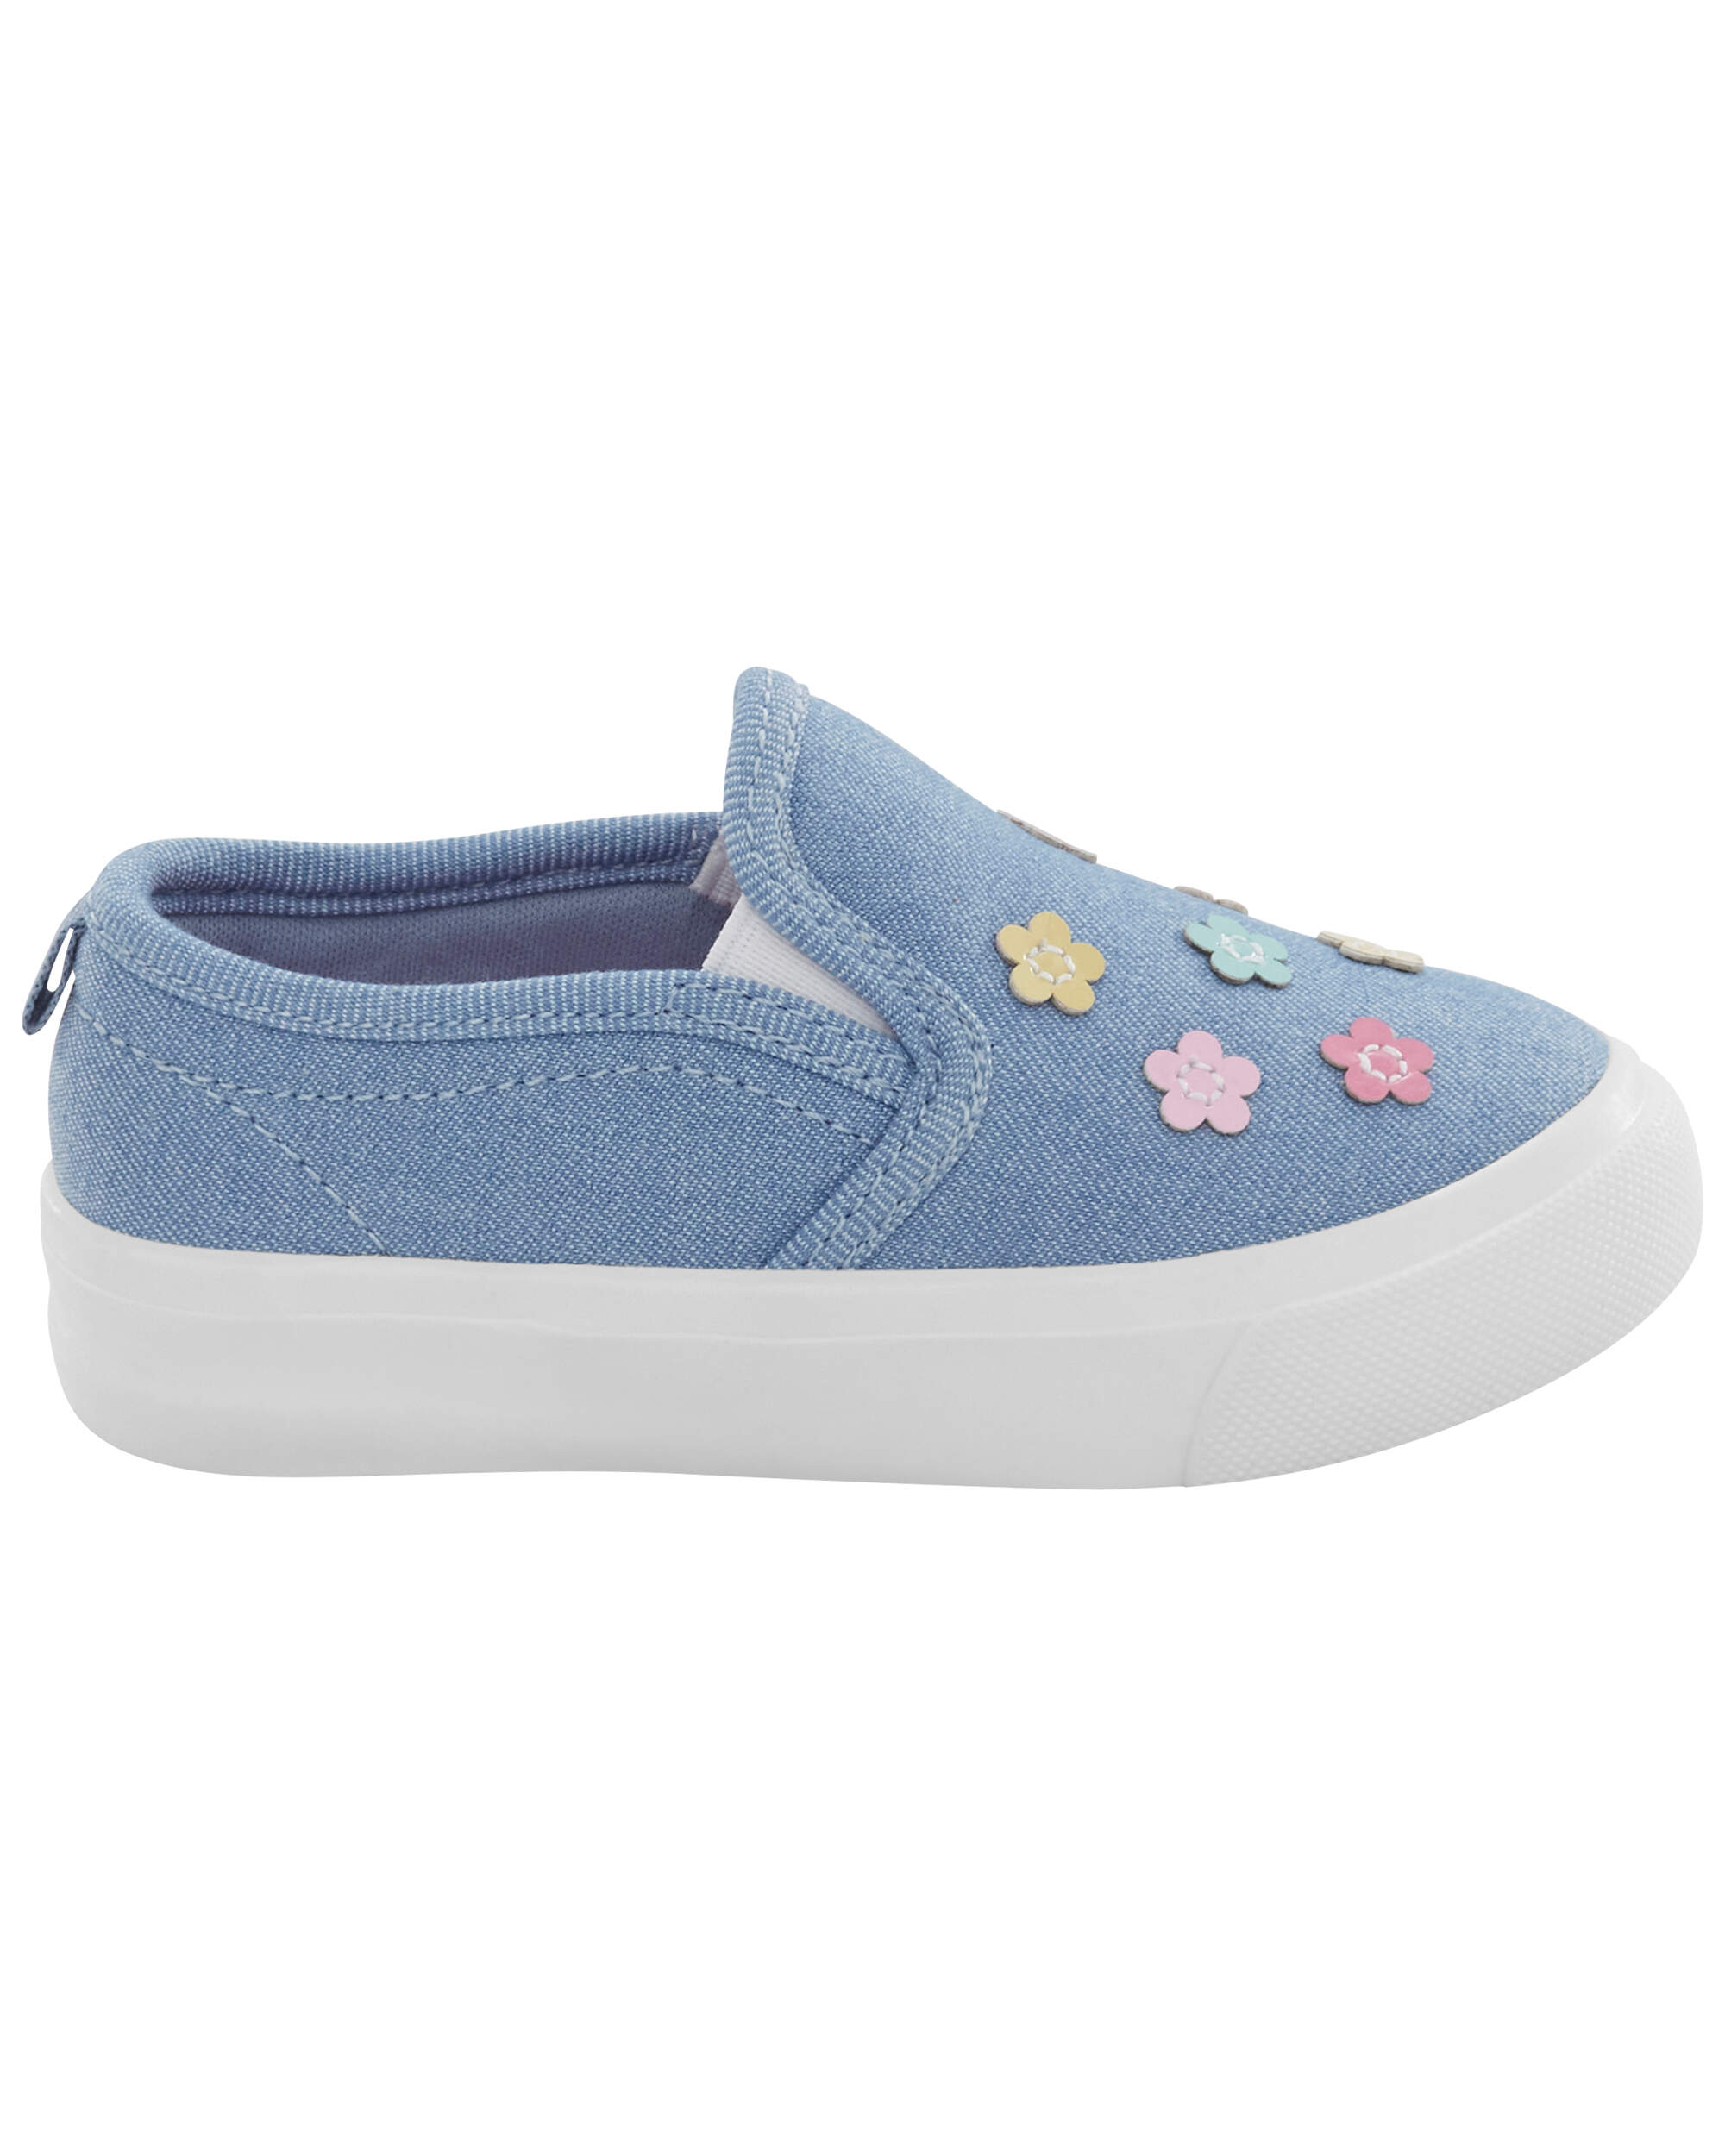 Floral Chambray Slip-On Shoes